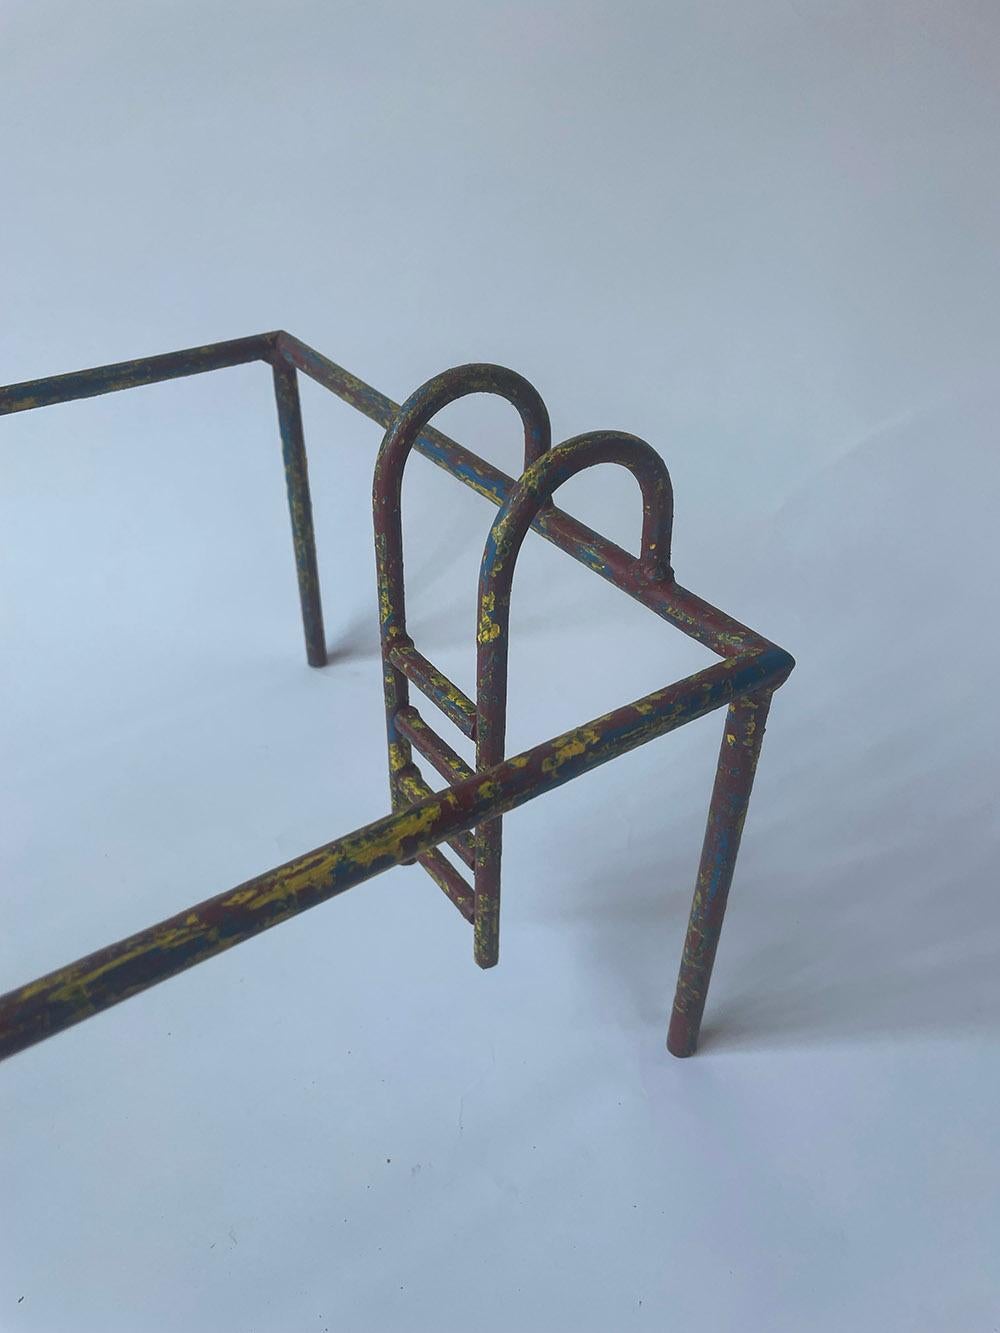 GRAND POOL is a unique sculpture by Spanish contemporary artist Ramon Enrich. 
Painted iron sculpture, oxidized patina and wax finish, 23 cm × 50 cm × 30 cm.
Halfway between a sculpture and a three-dimensional drawing, this artwork is full of irony